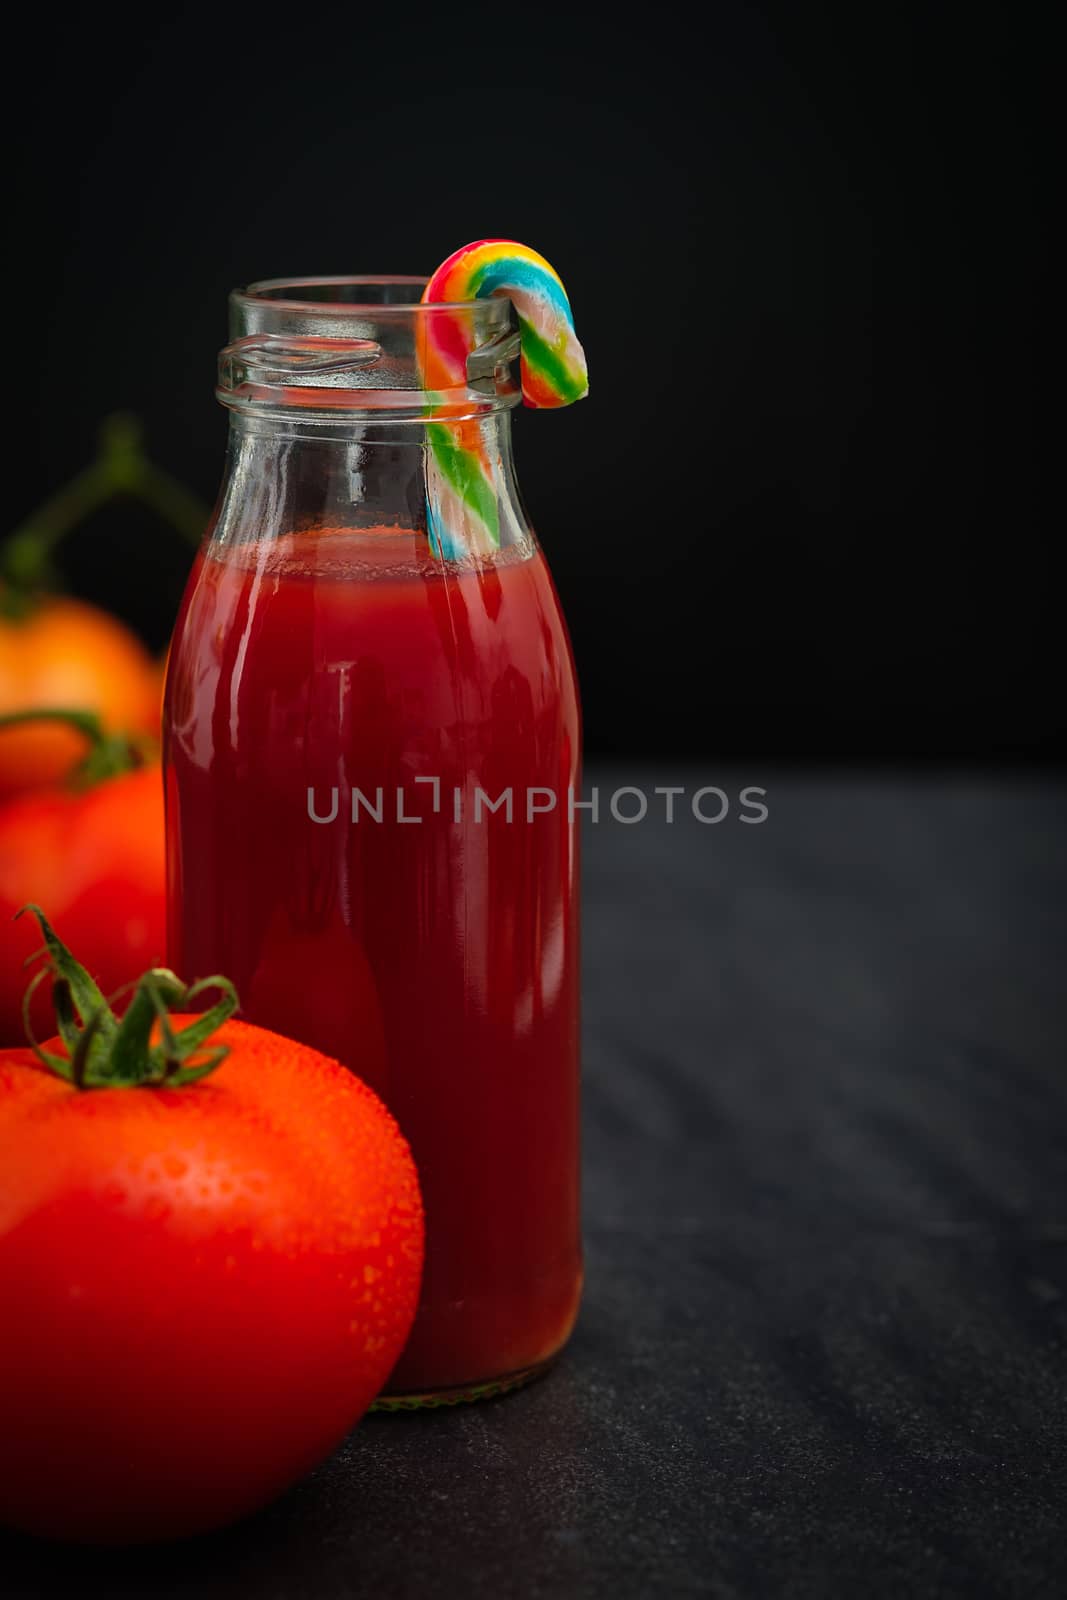 Still life of fresh ripe tomatoes juice on wooden background, Choose focus point. Good health concept.  Vertical picture style.